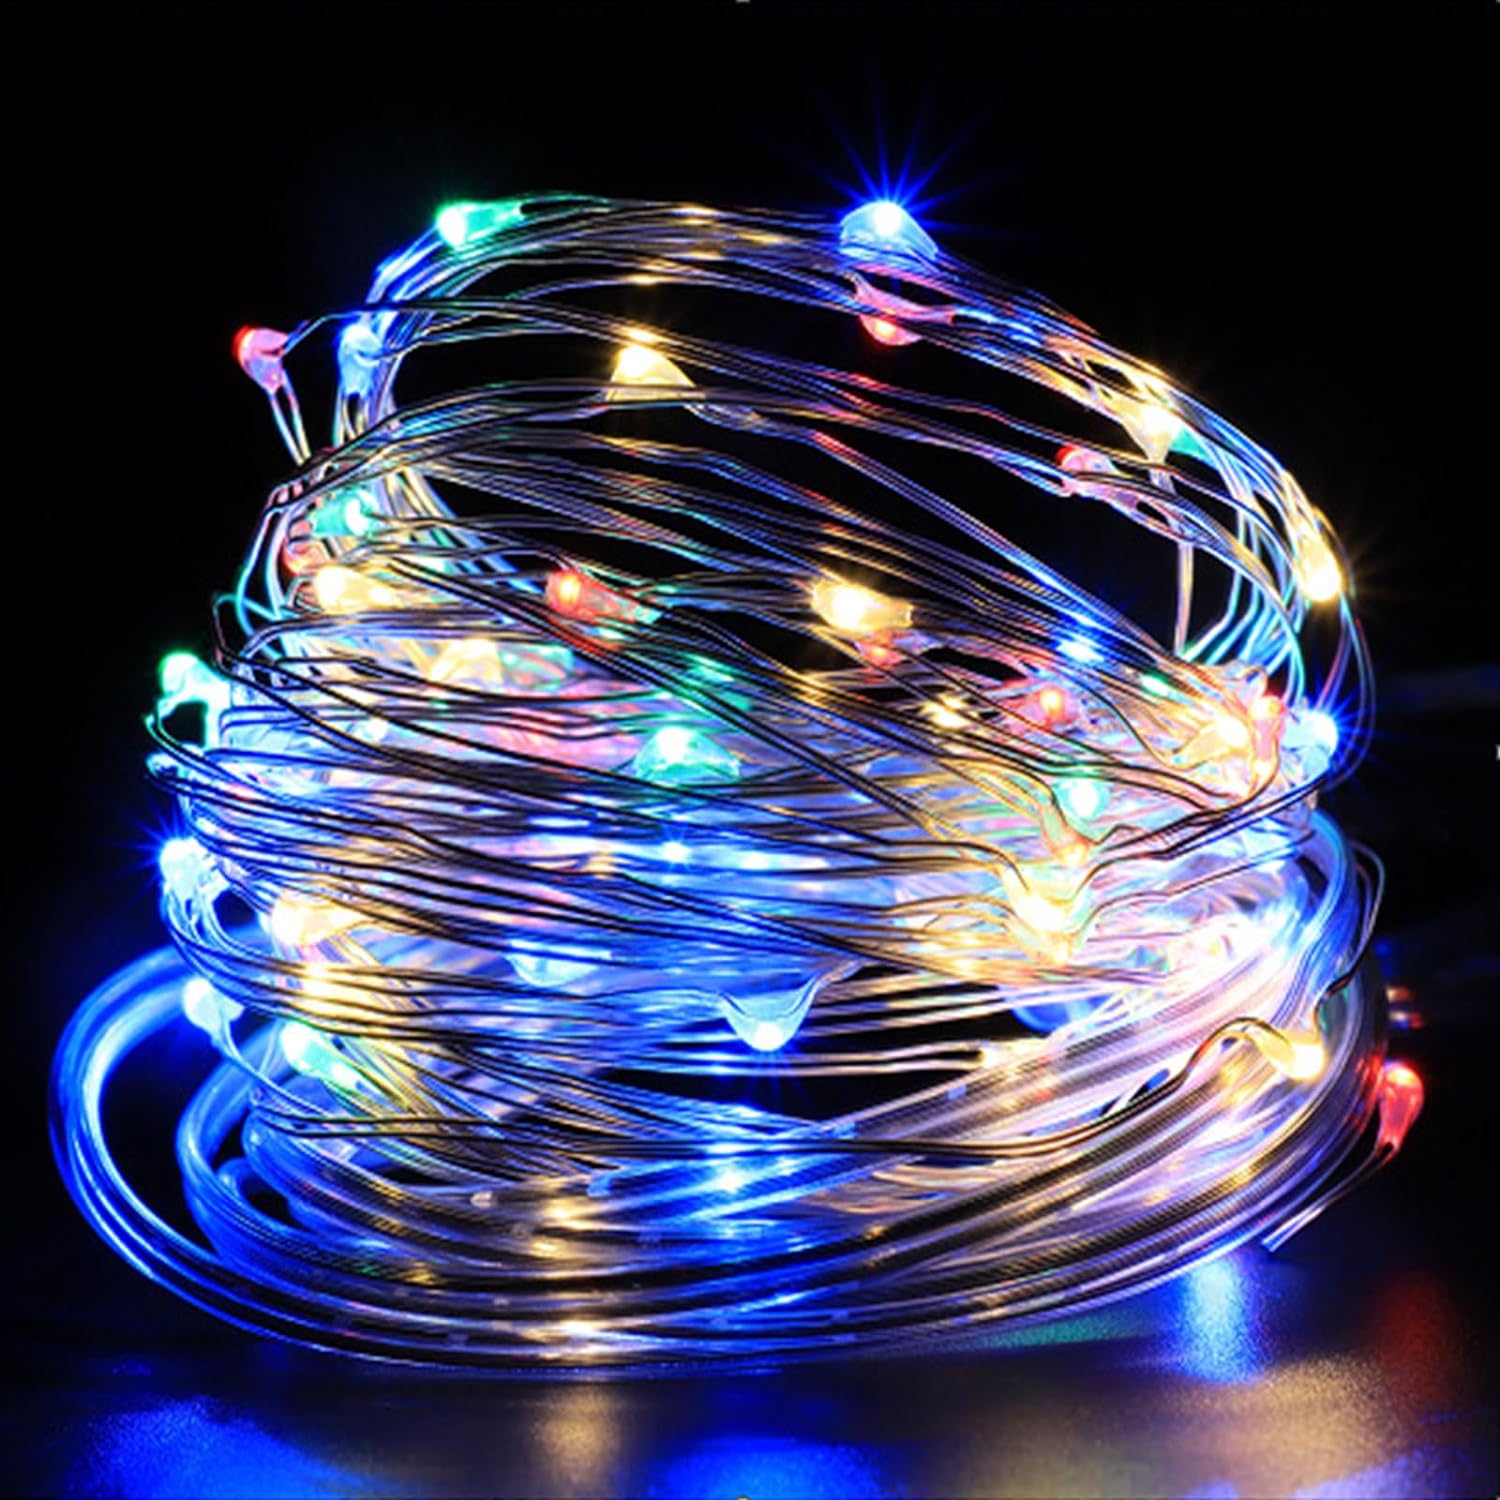 Fairy Lights Battery Operated 1 Pack 16FT 50 Led Mini Battery Powered String Lights Twinkle Lights Mason Jar Lights Waterproof Firefly Lights DIY PartyWeddingChristmasDecorationMulticolor